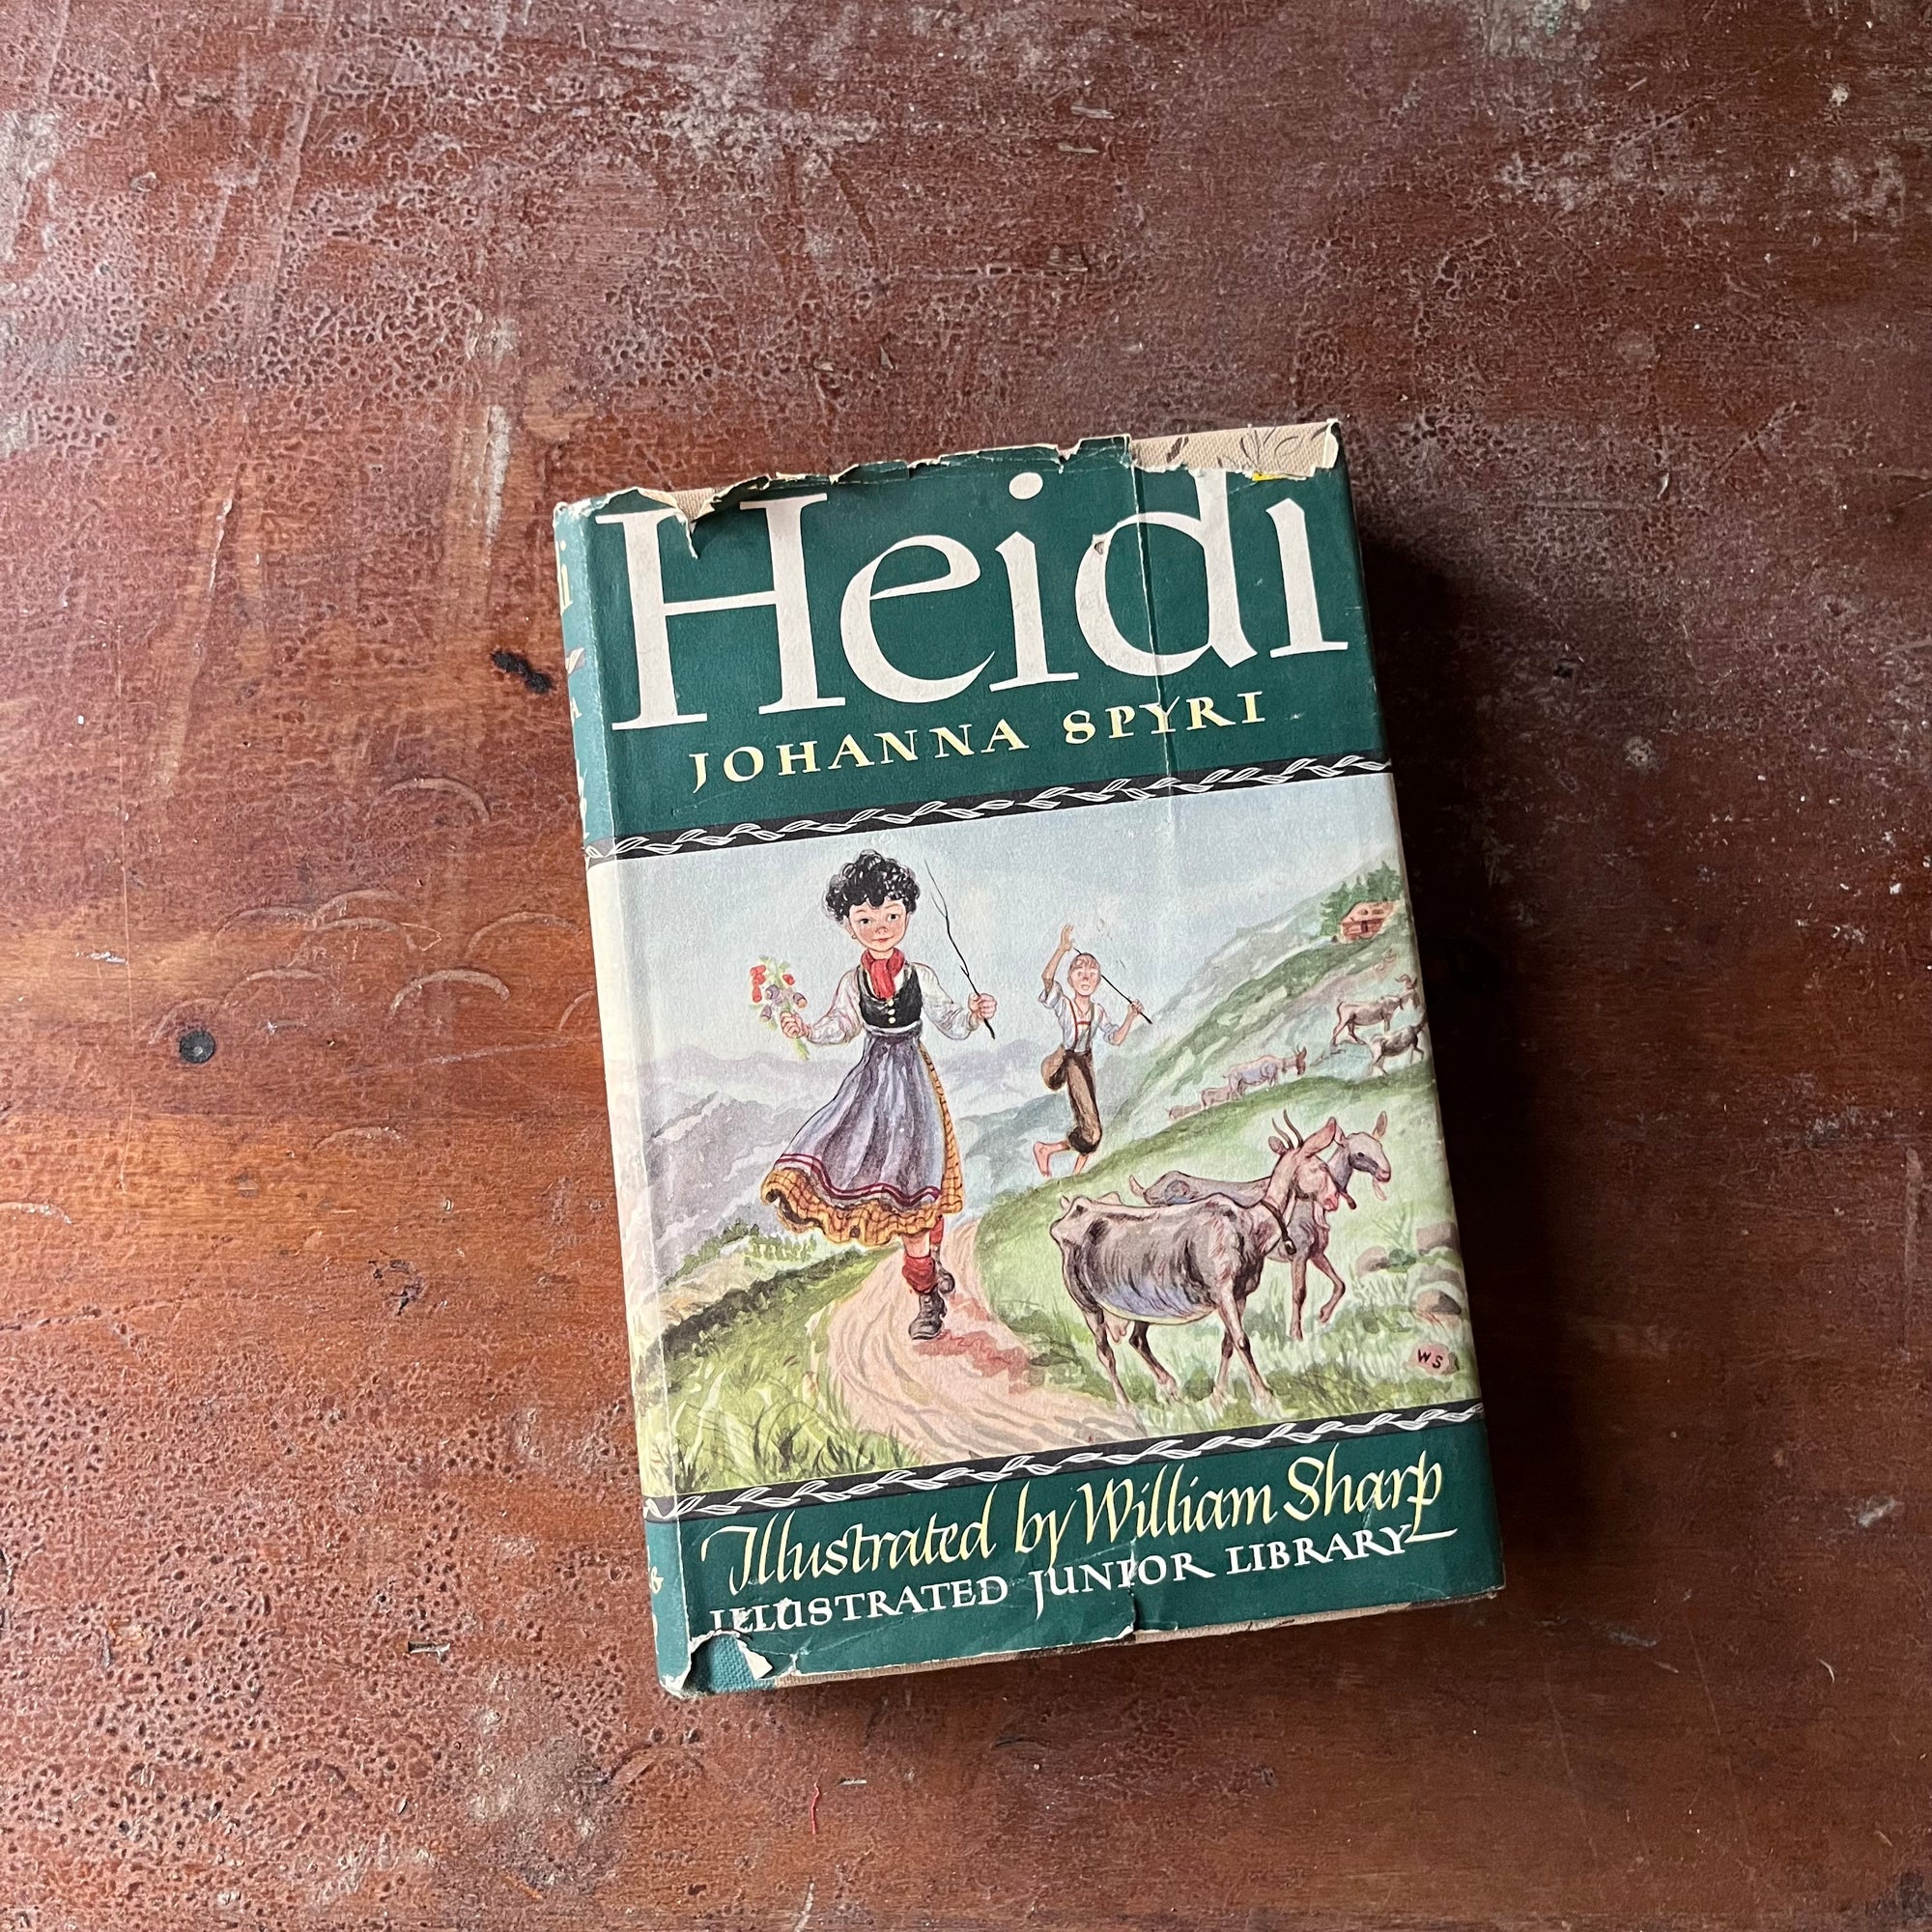 Illustrated Junior Library Editions-Heidi by Johanna Spyri with illustrations by William Sharp-vintage children's classic literature-view of the dust jacket's front cover with an illustration of Heidi with goats